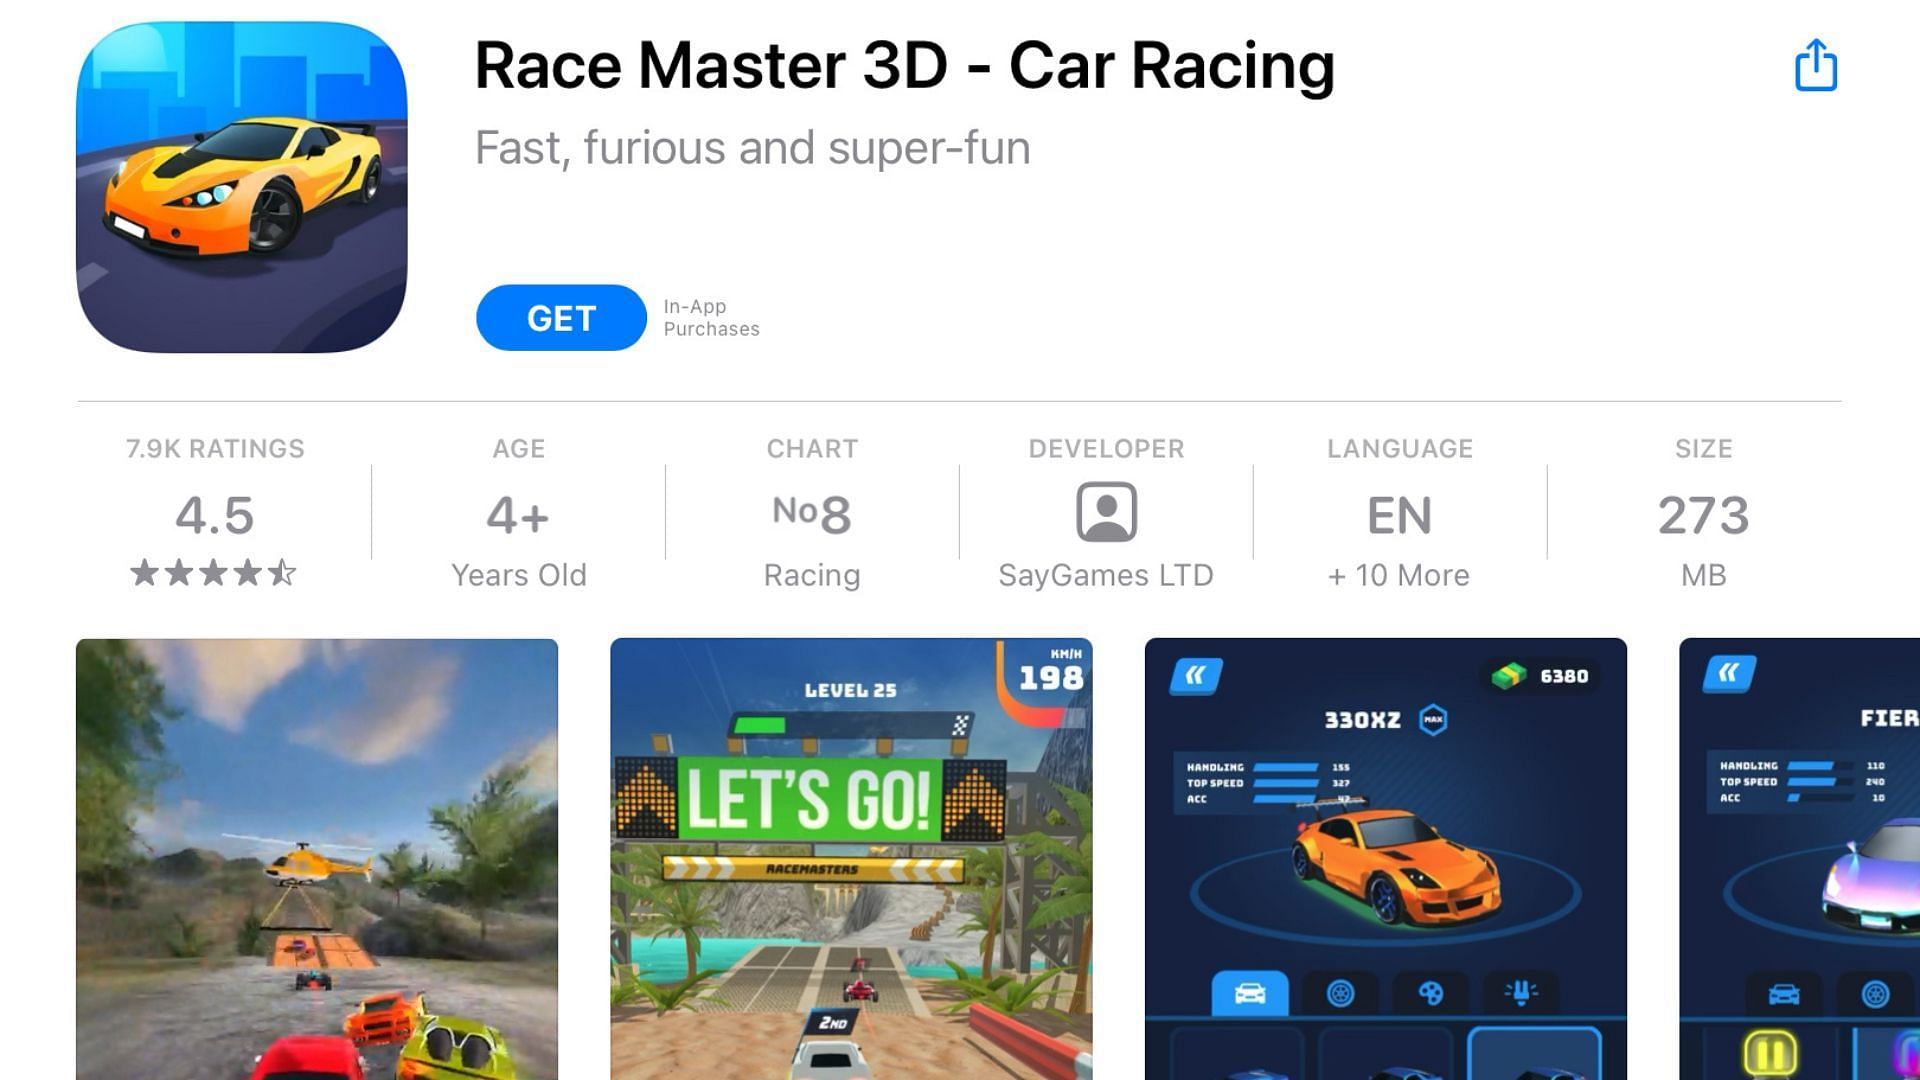 Race Master 3D was the fifth most downloaded mobile game in 2022 (Image via App Store)